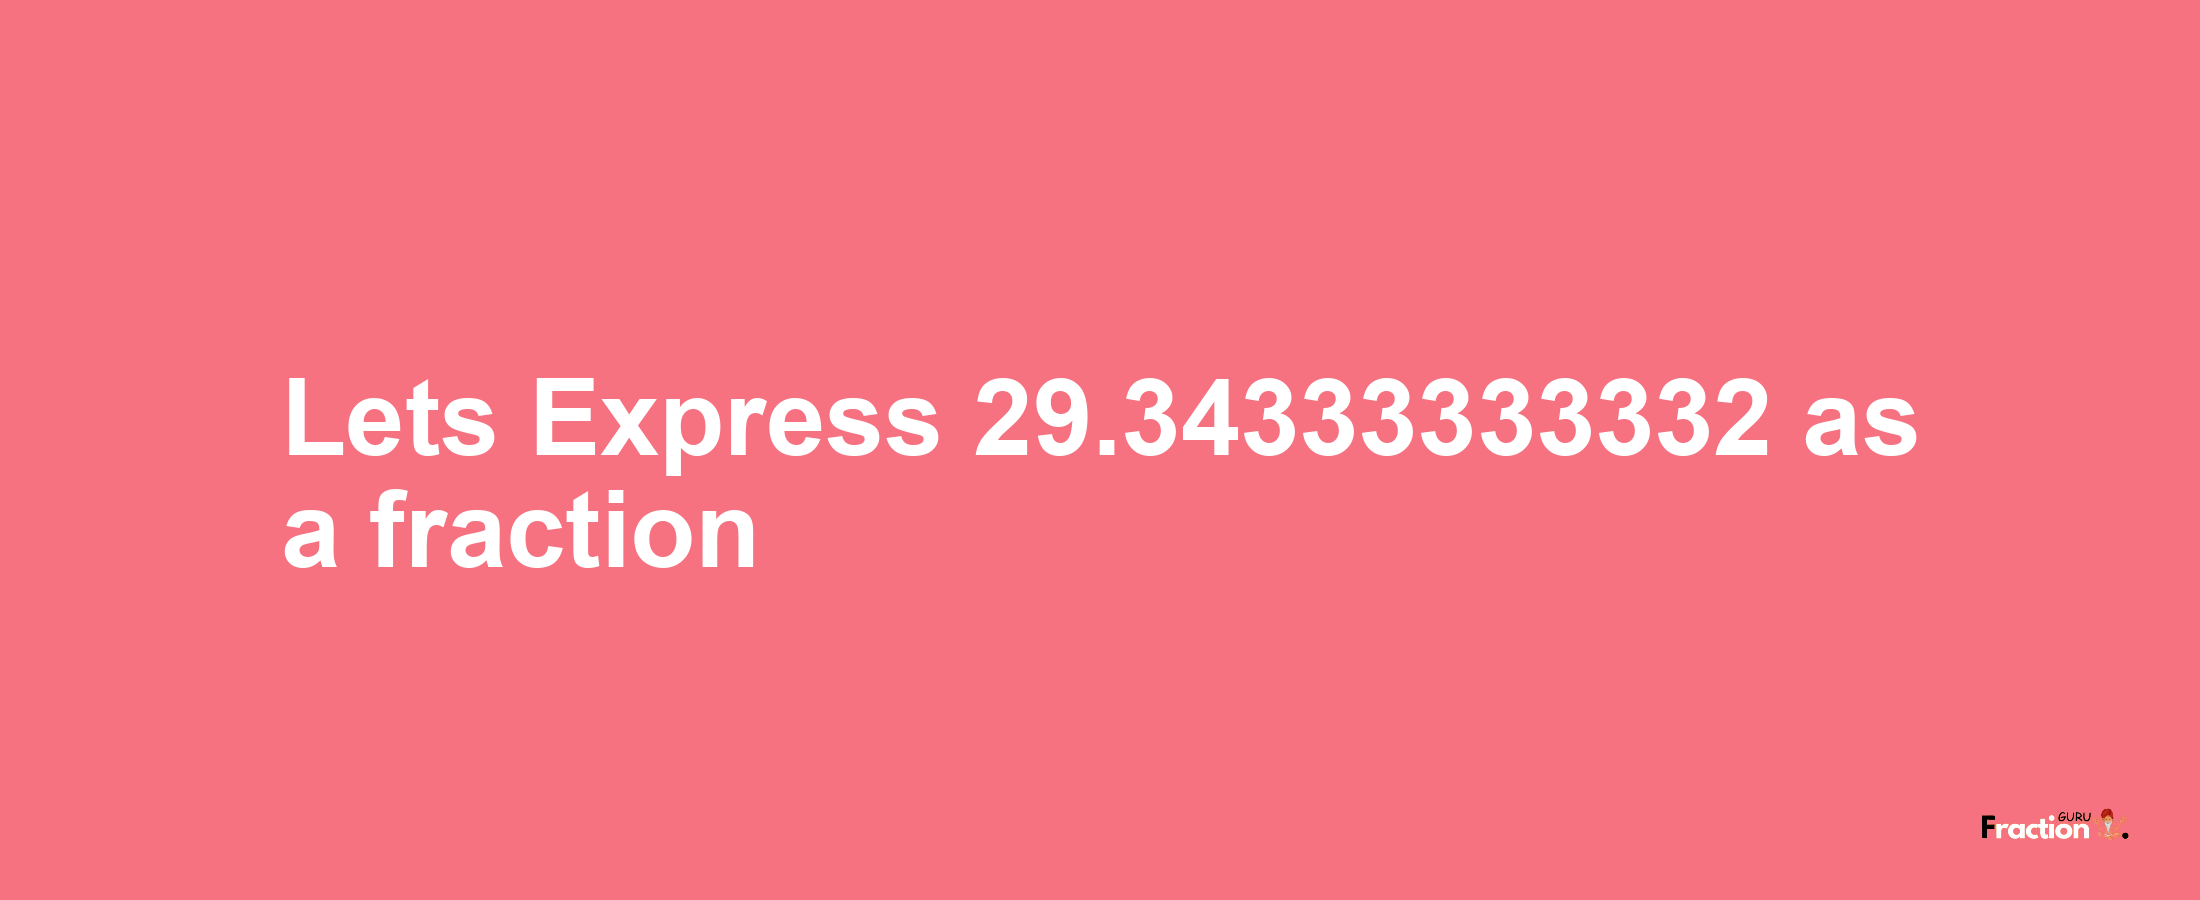 Lets Express 29.34333333332 as afraction